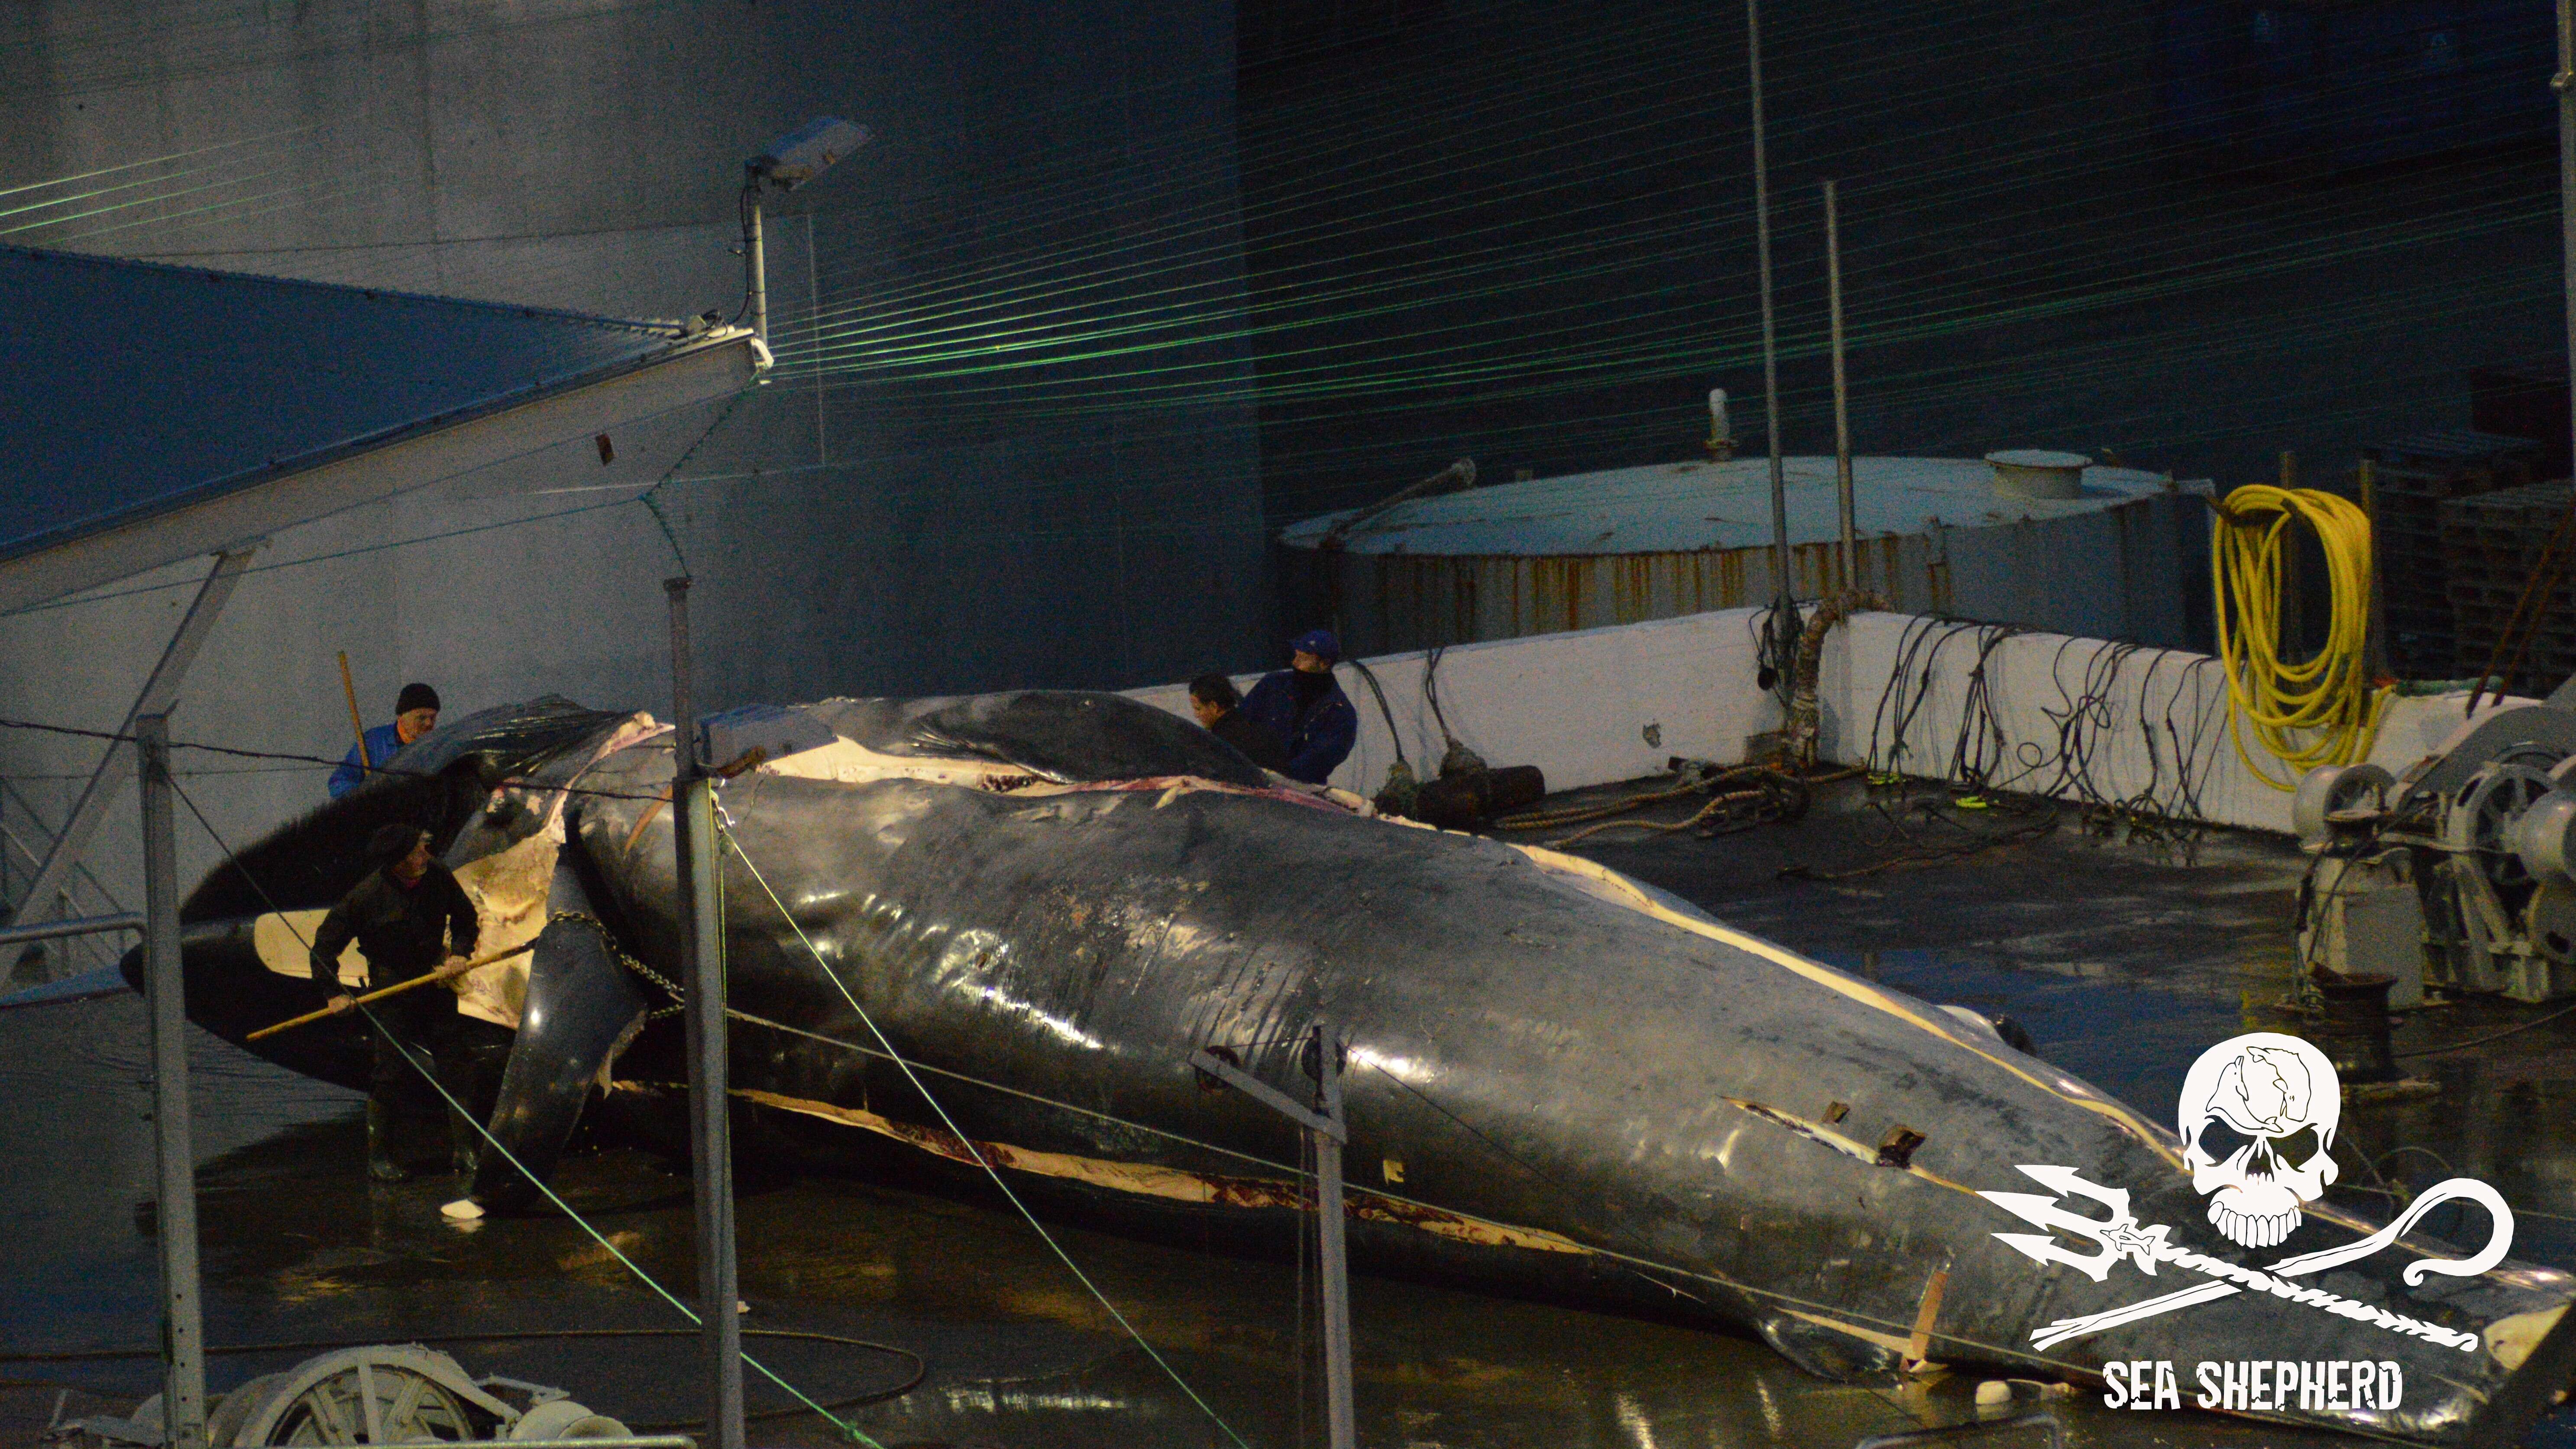 Workers cutting up dead whale